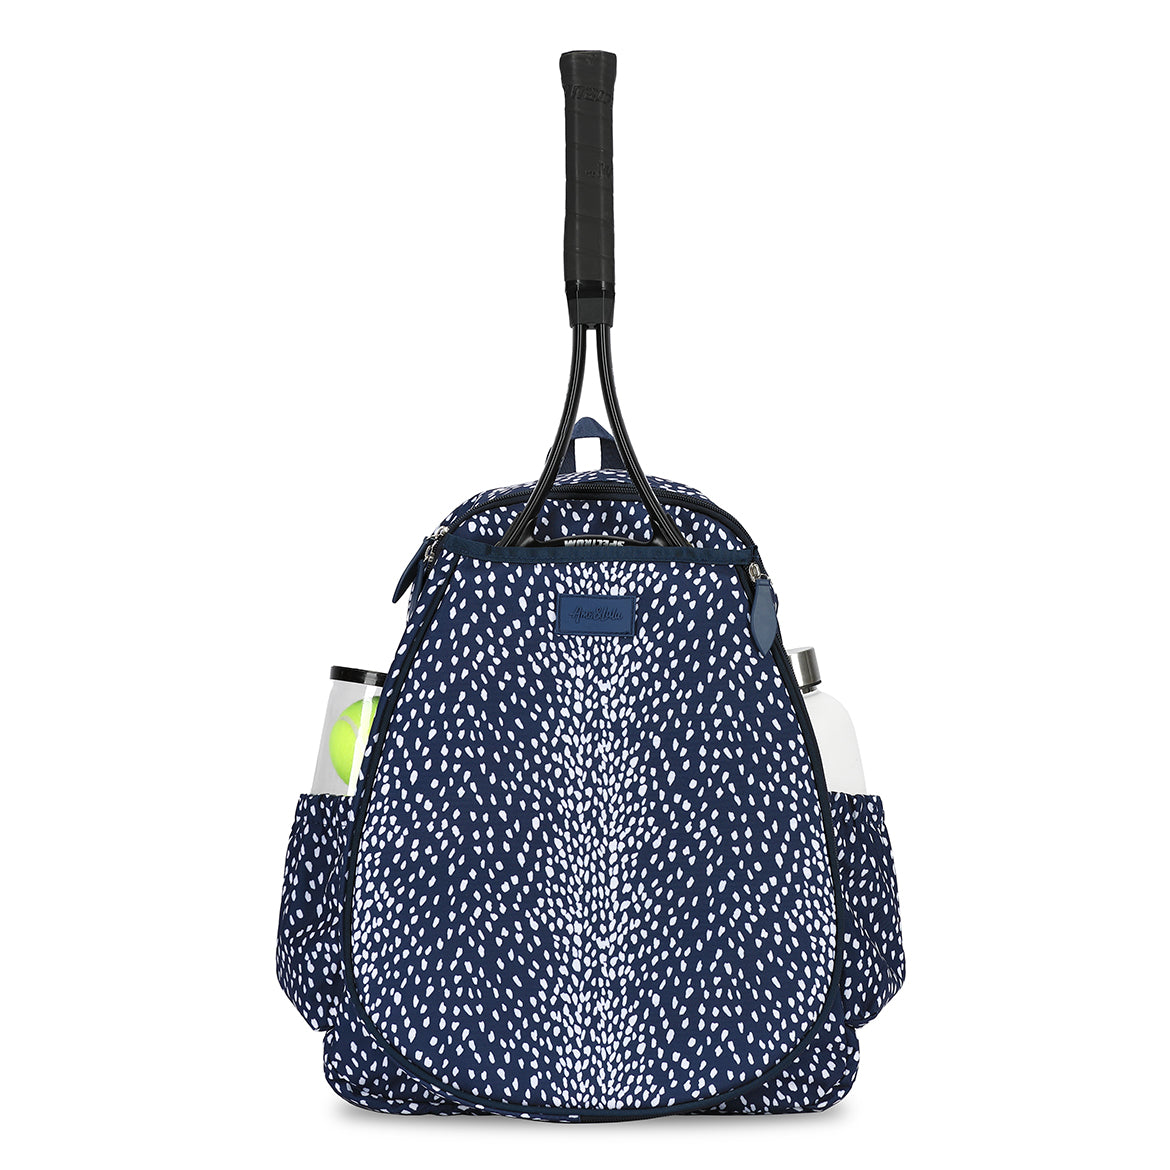 Front view of navy and white spotted antelope pattern tennis backpack. Backpack has water bottle and tennis balls in side pockets.